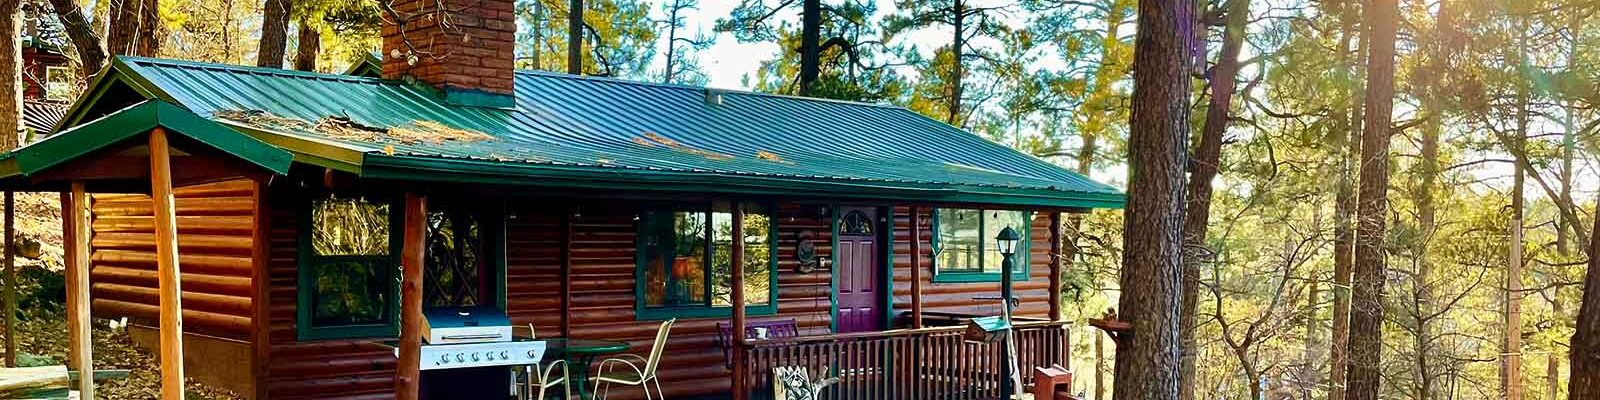 Pinetop Vista Cabins, Cabin 2 the Wildlife Cabin - Outside View